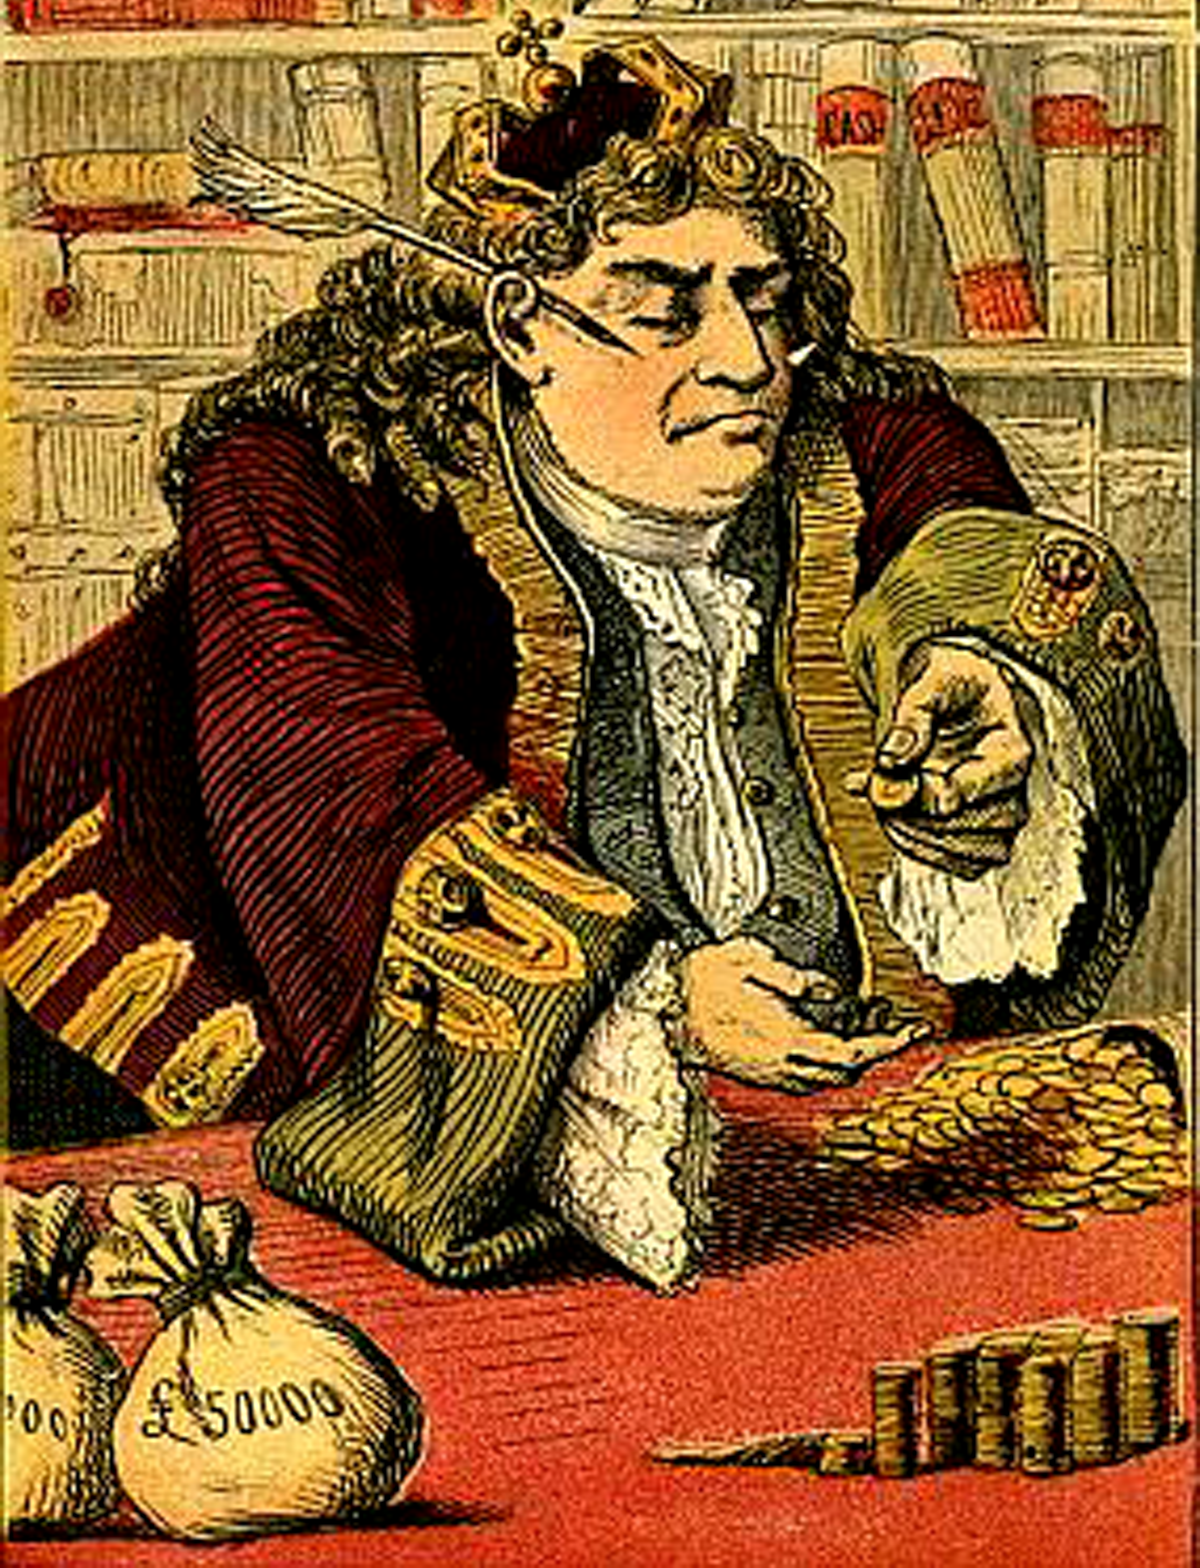 Illustration of king counting his mo ey from Sing a Song of Sixpence